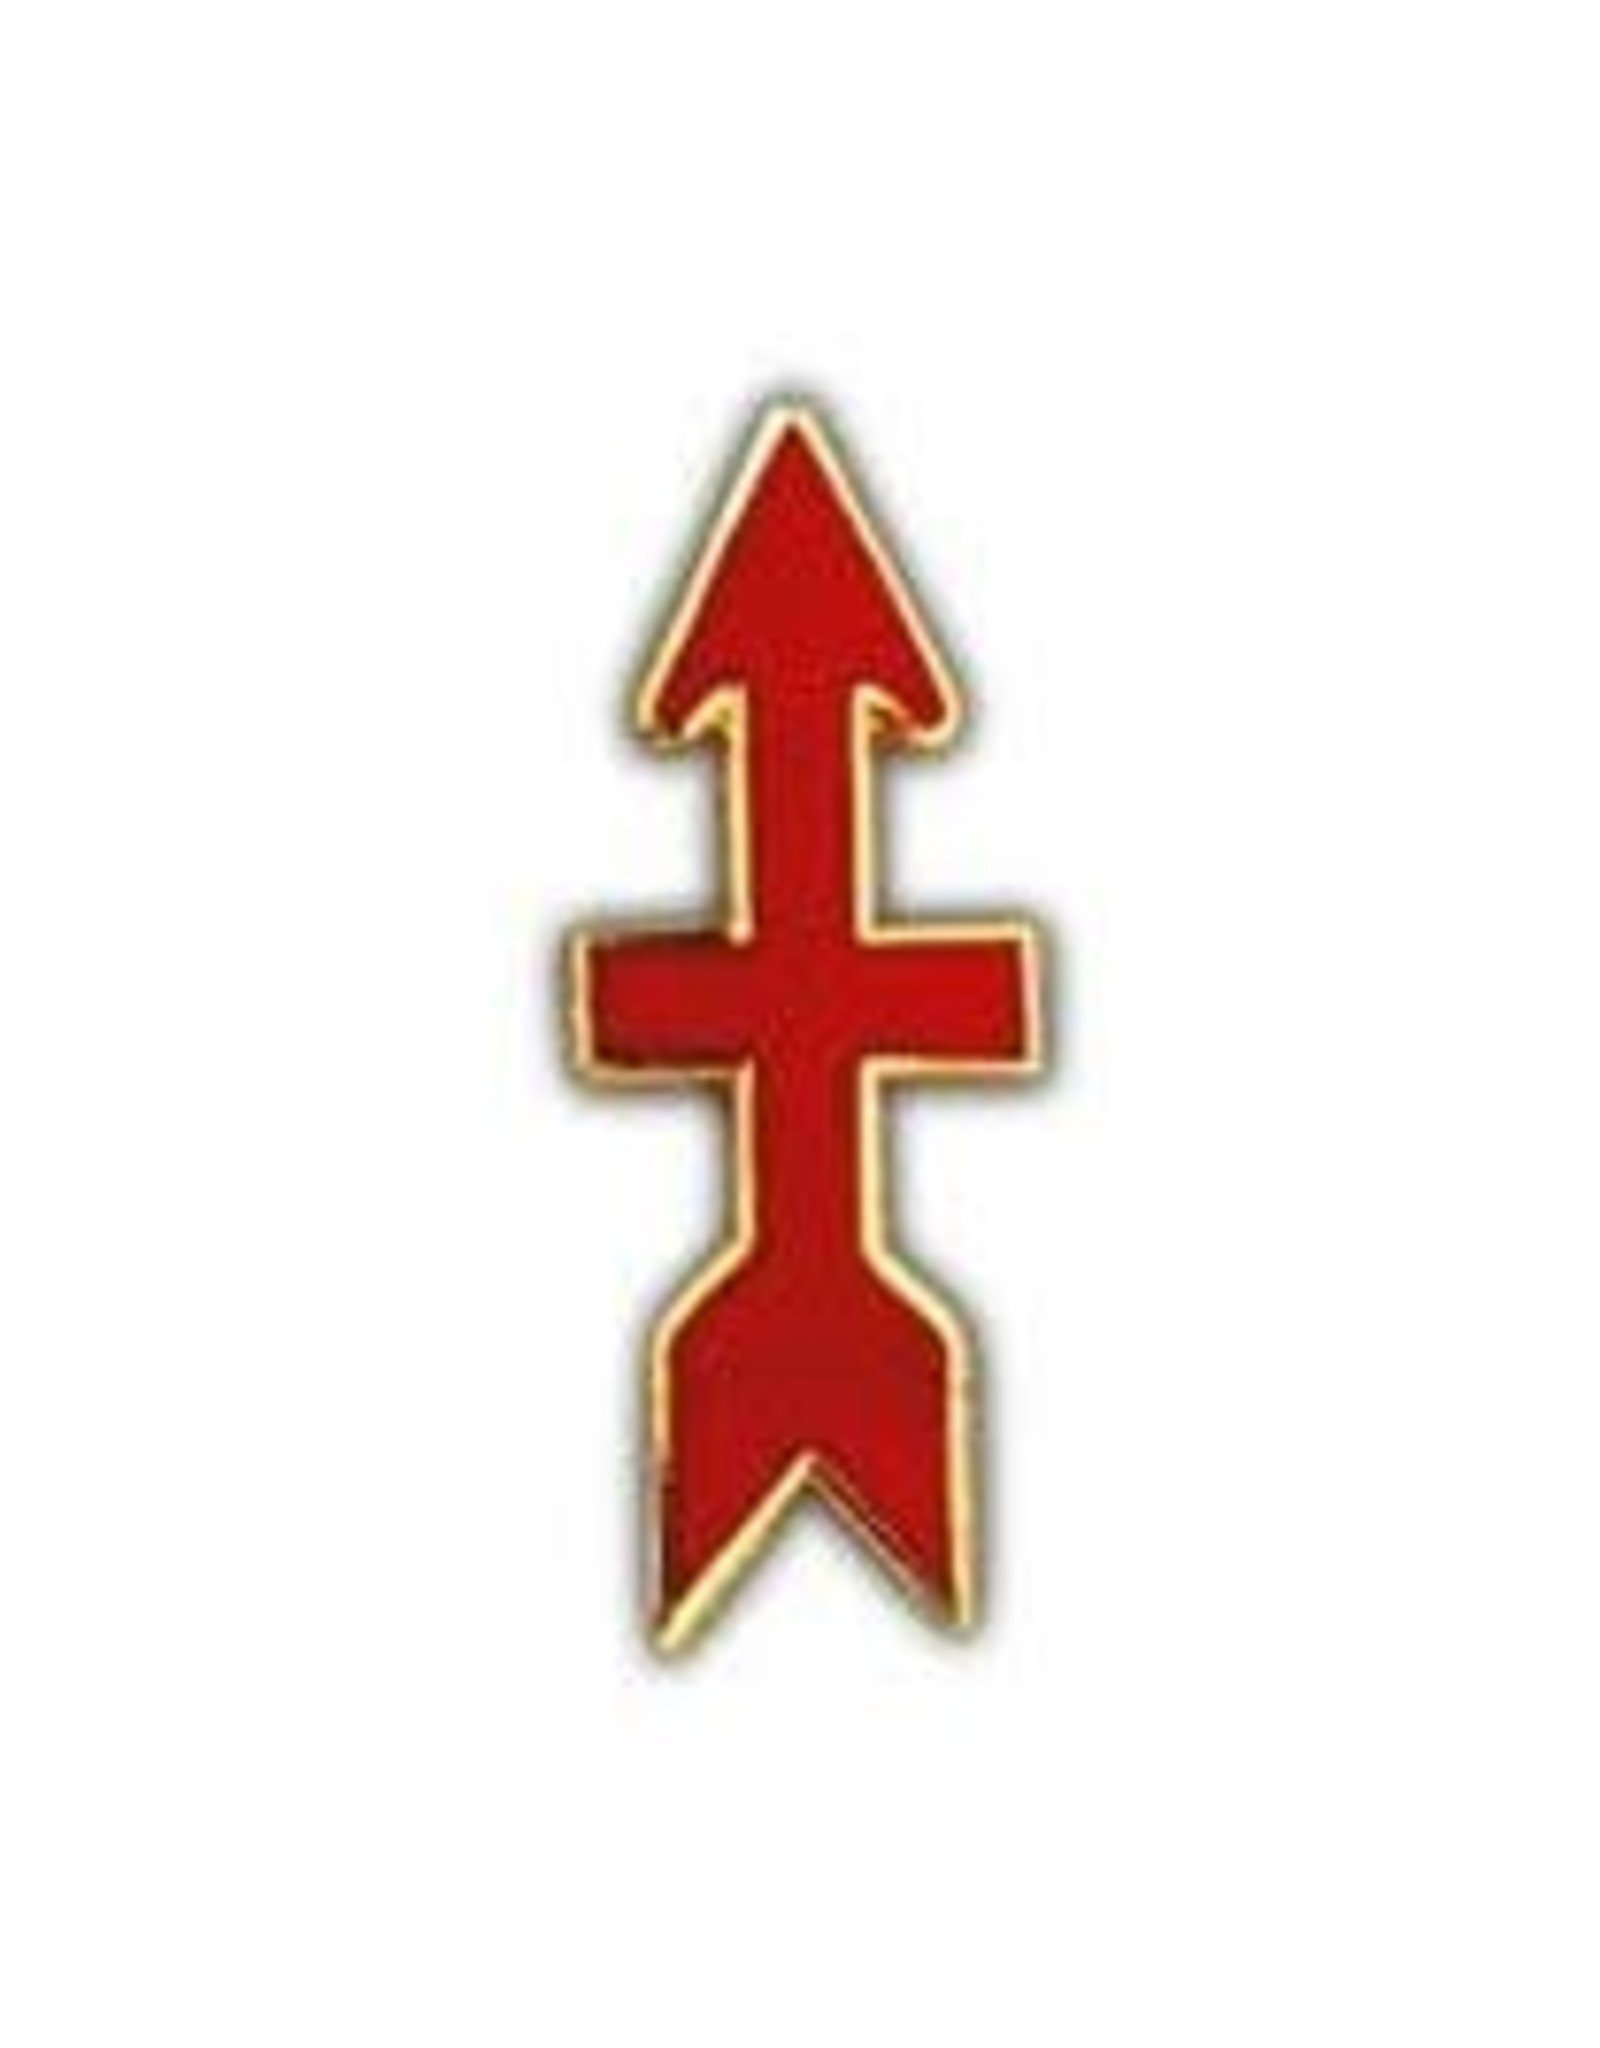 Pin - Army 32nd Infantry Division